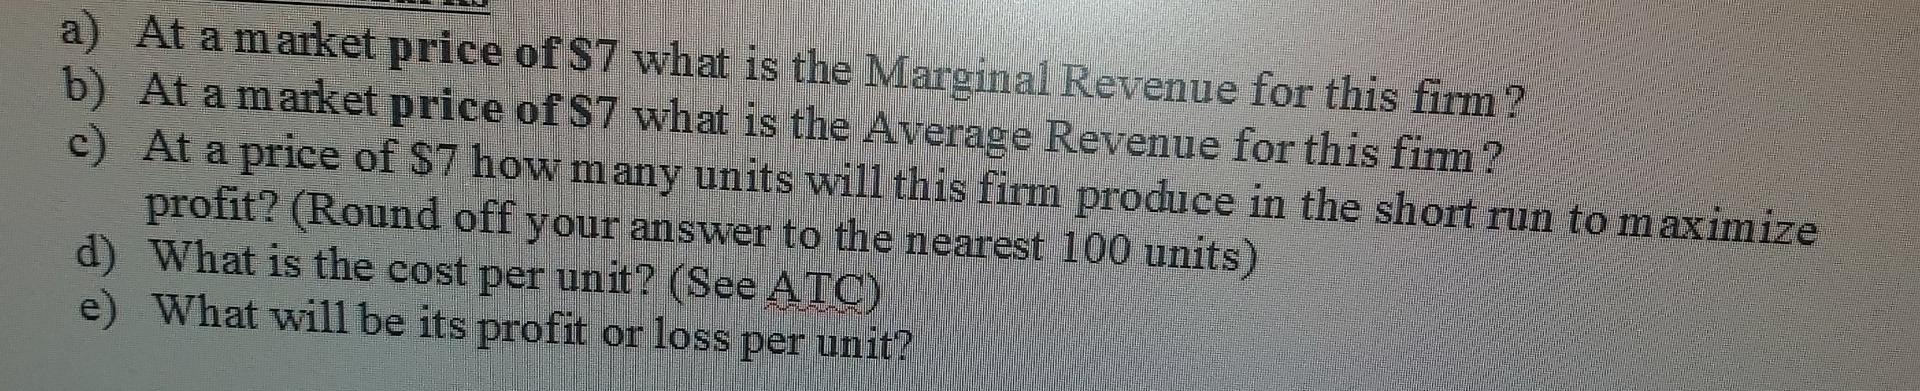 a) At a market price of S7 what is the Marginal Revenue for this firm ? b) At a market price of S7 what is the Average Revenu